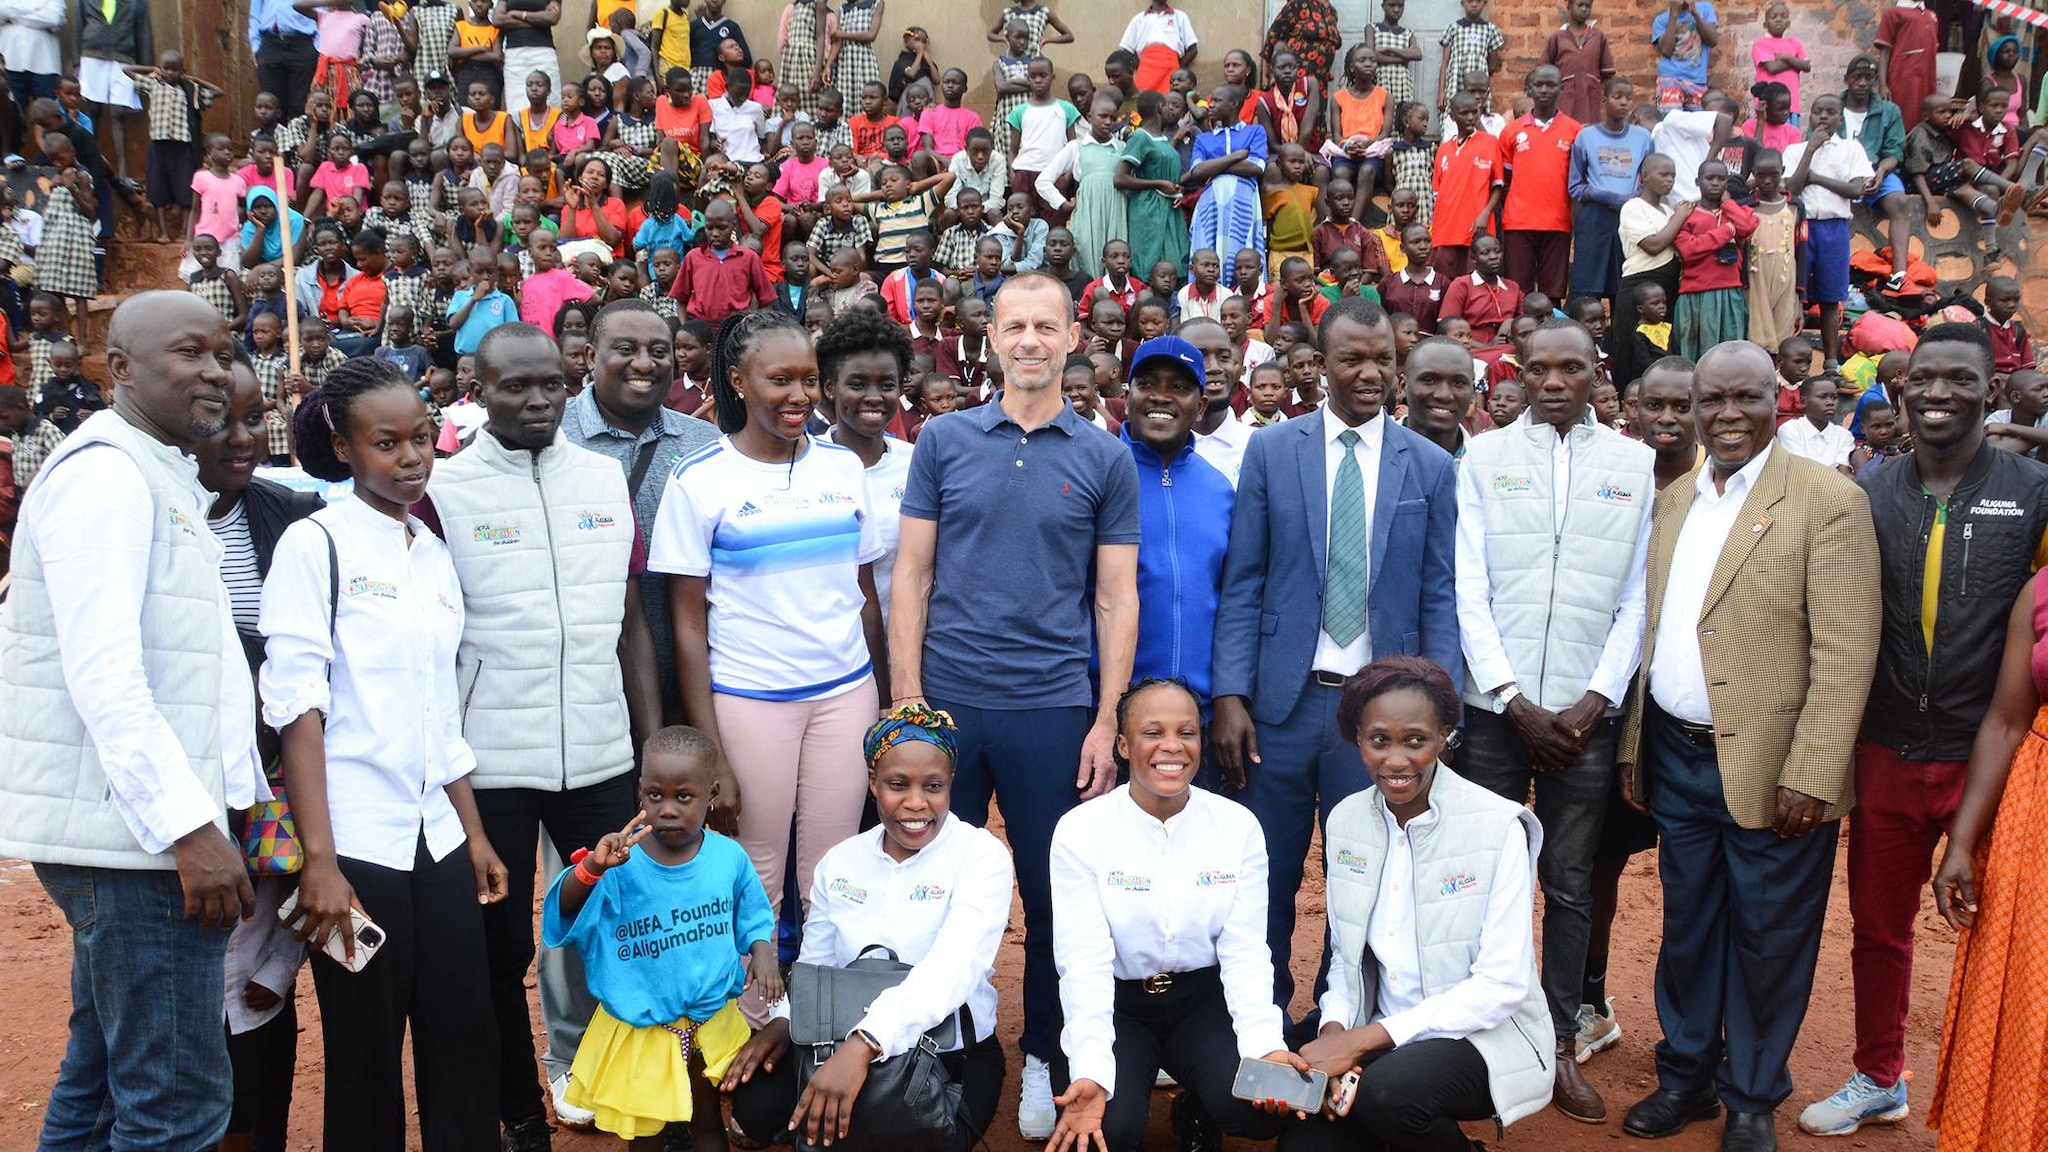 UEFA President sees football as a force for good in Uganda |  About UEFA